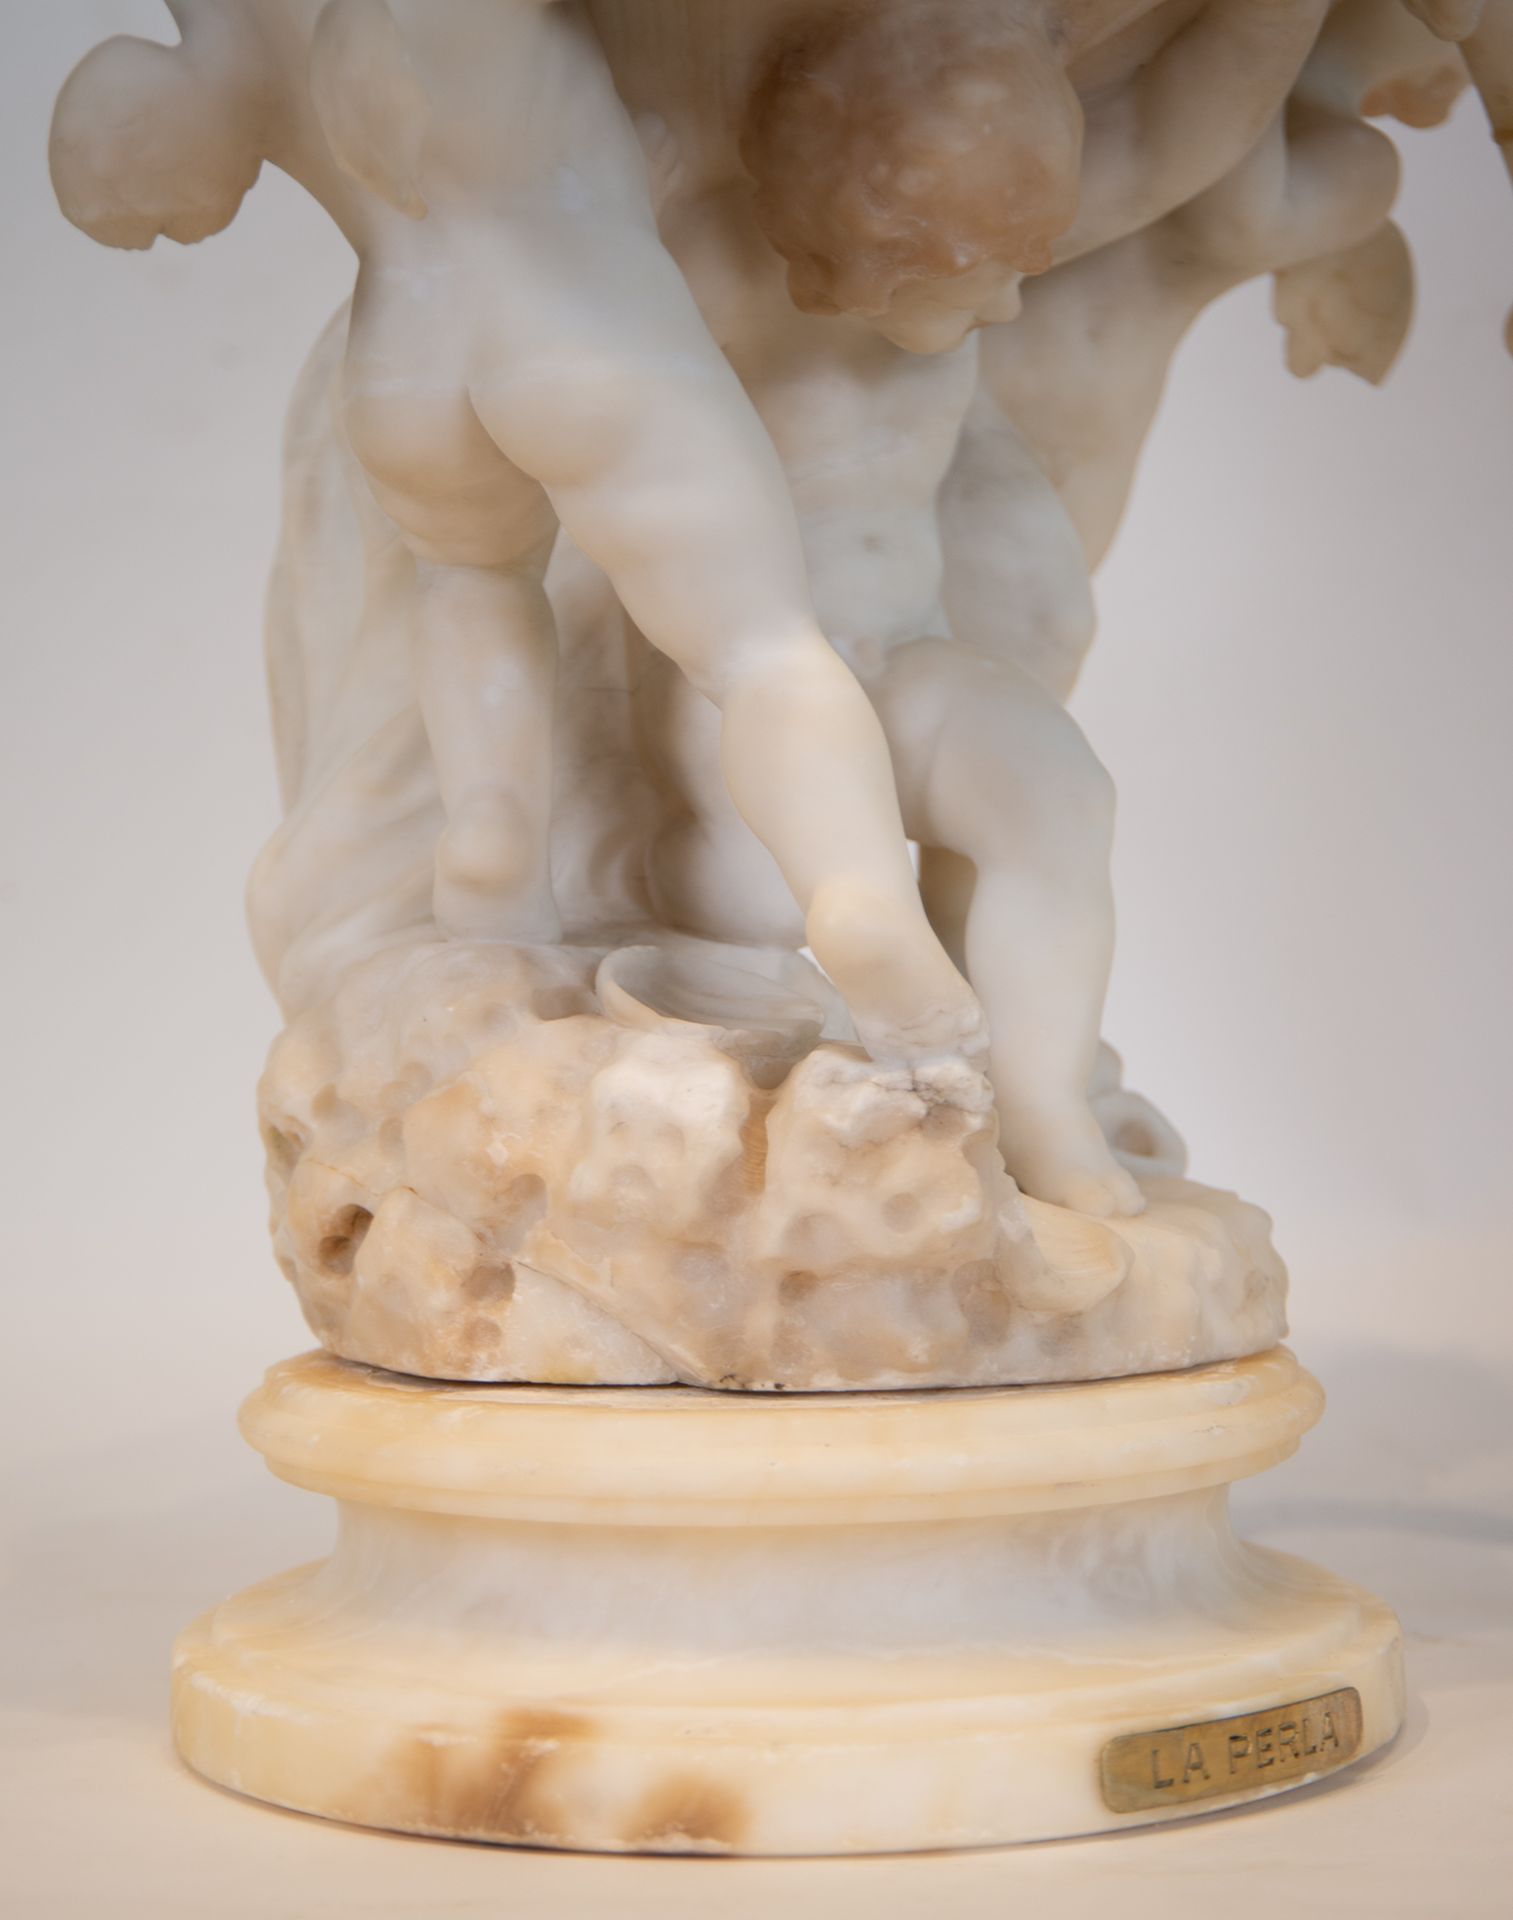 Elegant Alabaster centerpiece representing Cherubs holding an Oyster with a Lady inside, European sc - Image 7 of 8